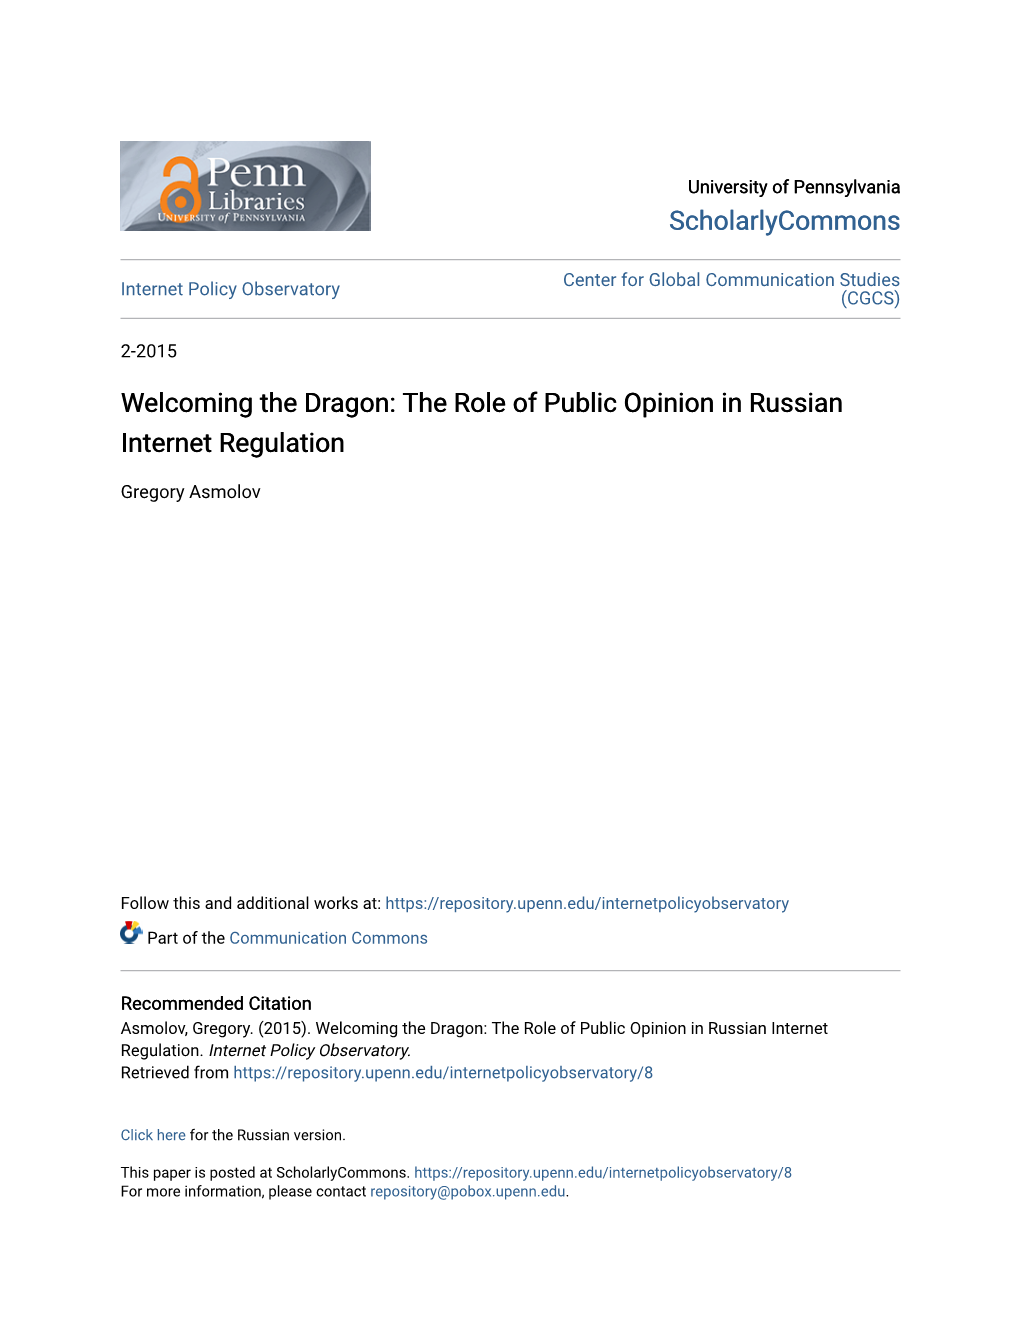 Welcoming the Dragon: the Role of Public Opinion in Russian Internet Regulation